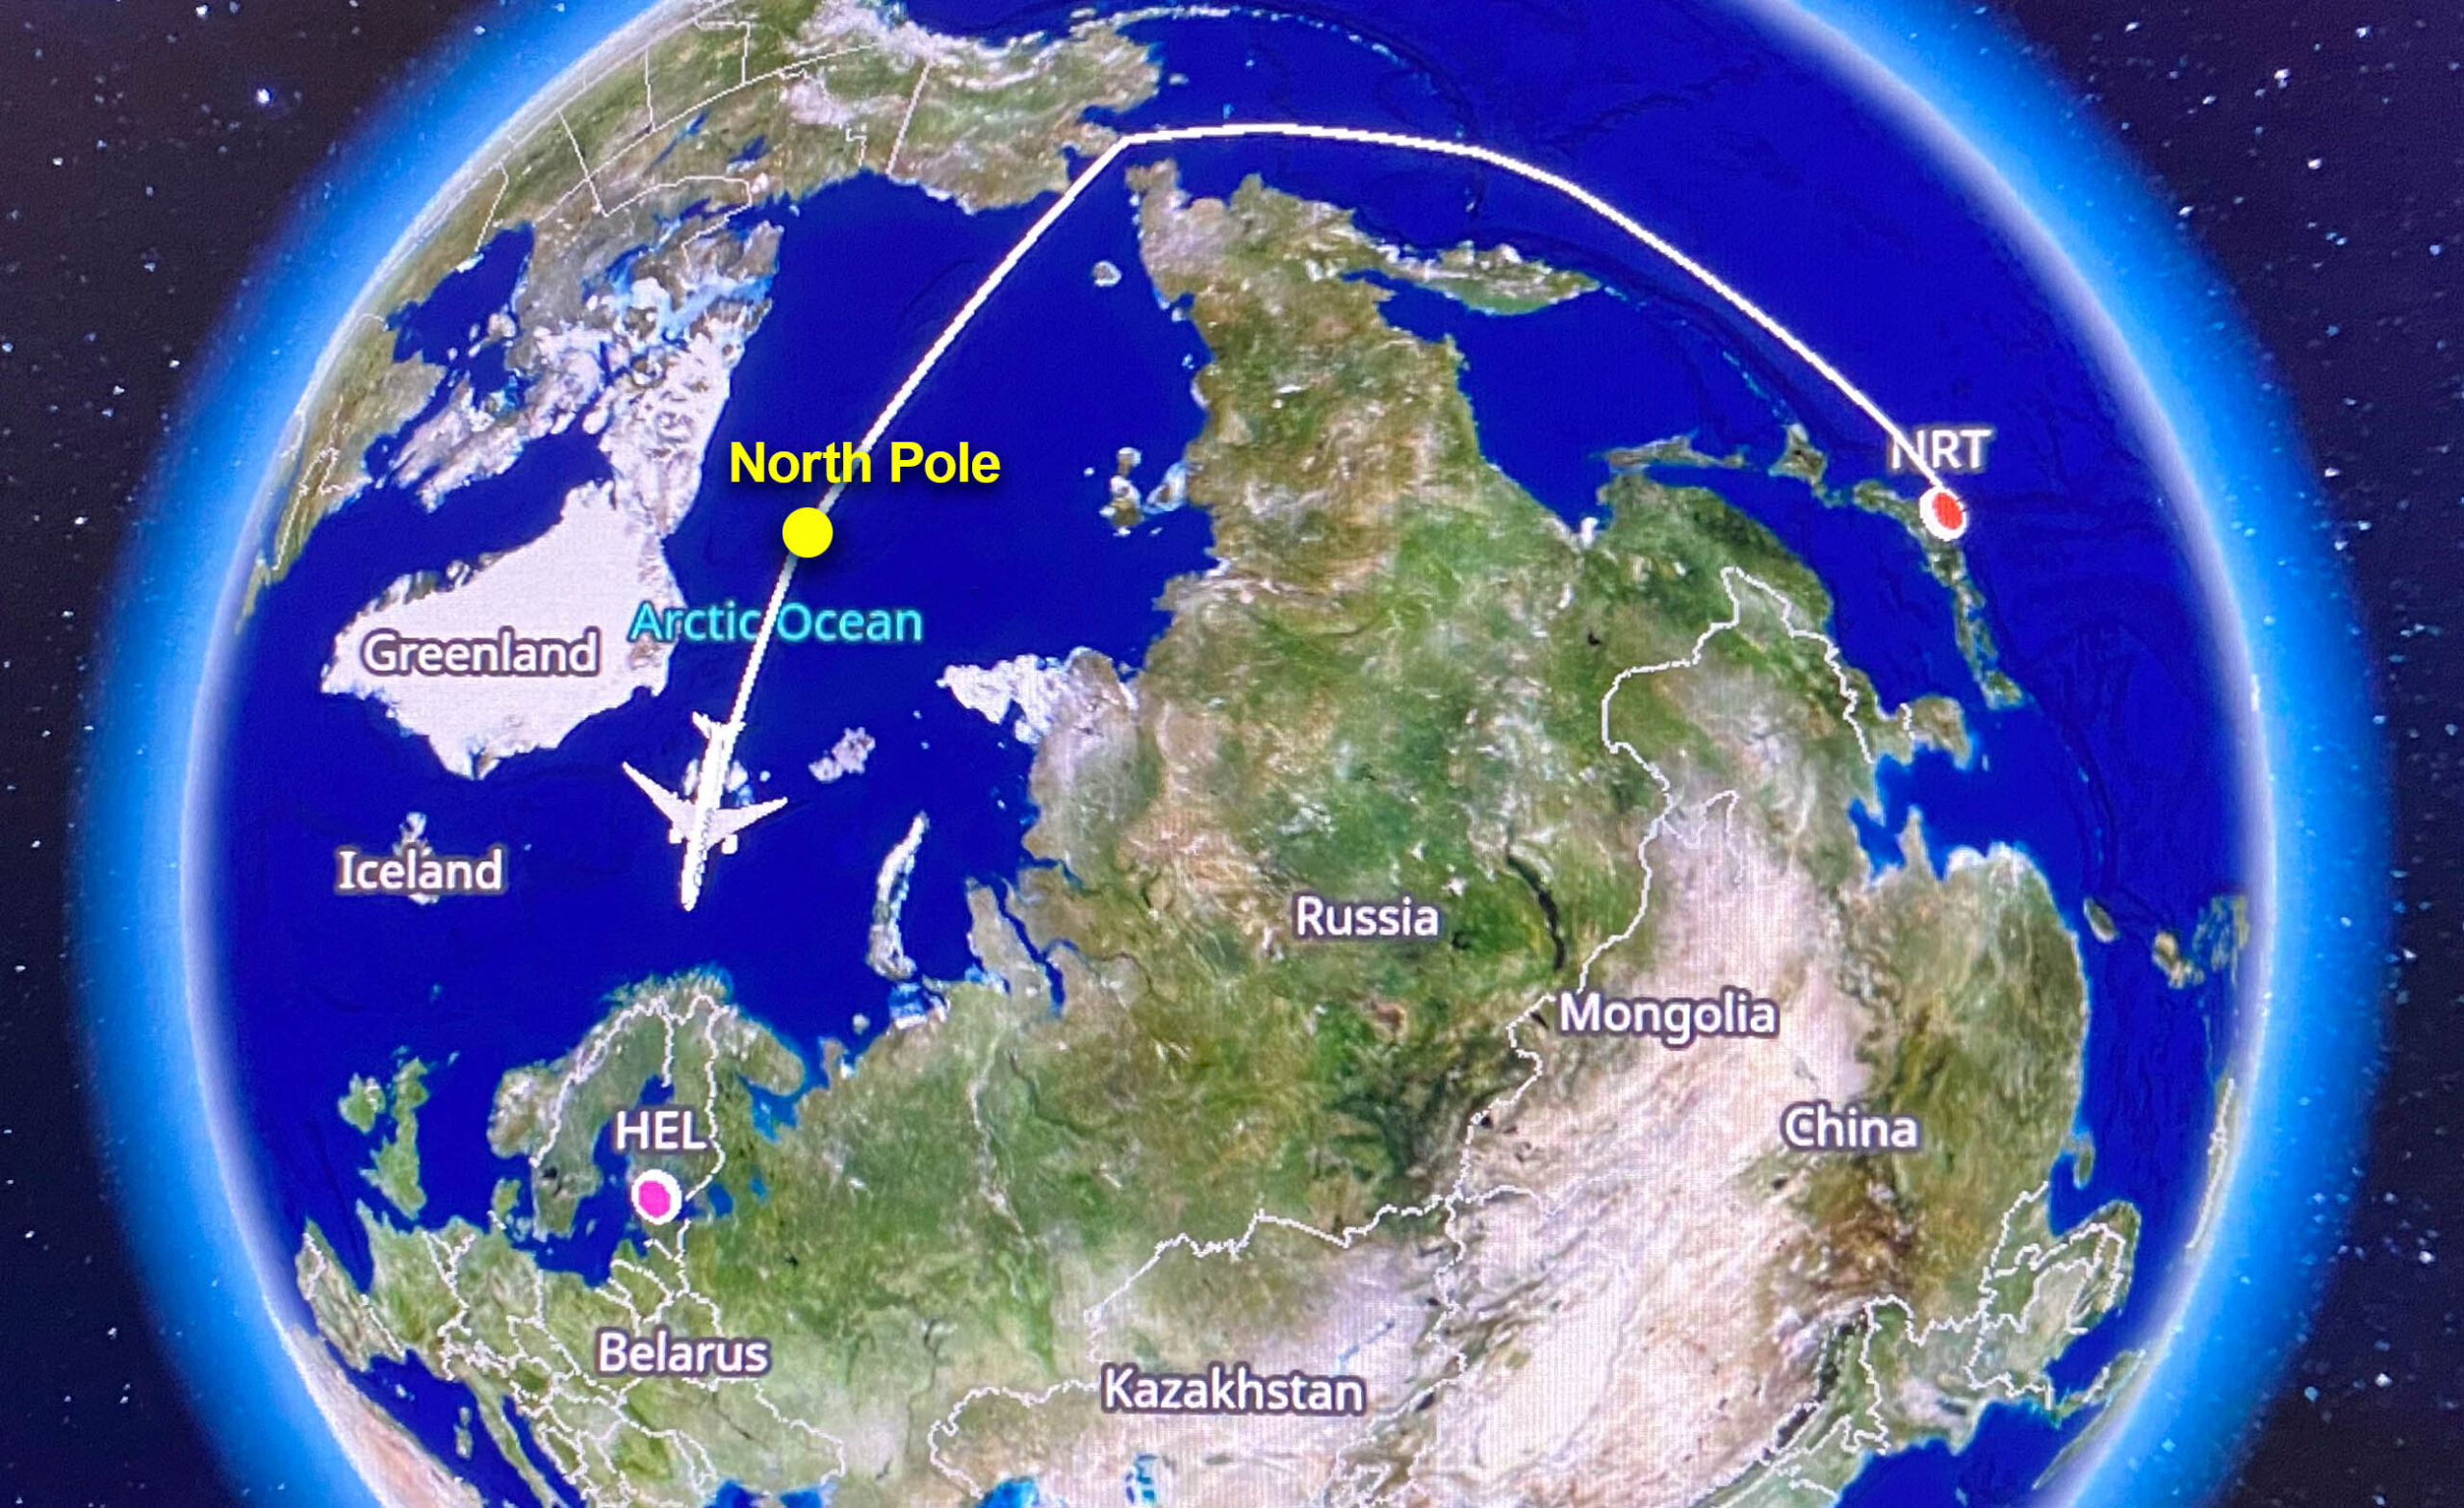 photography-20220628-north-pole-arctic-ocean-from-tokyo-to-helsinki